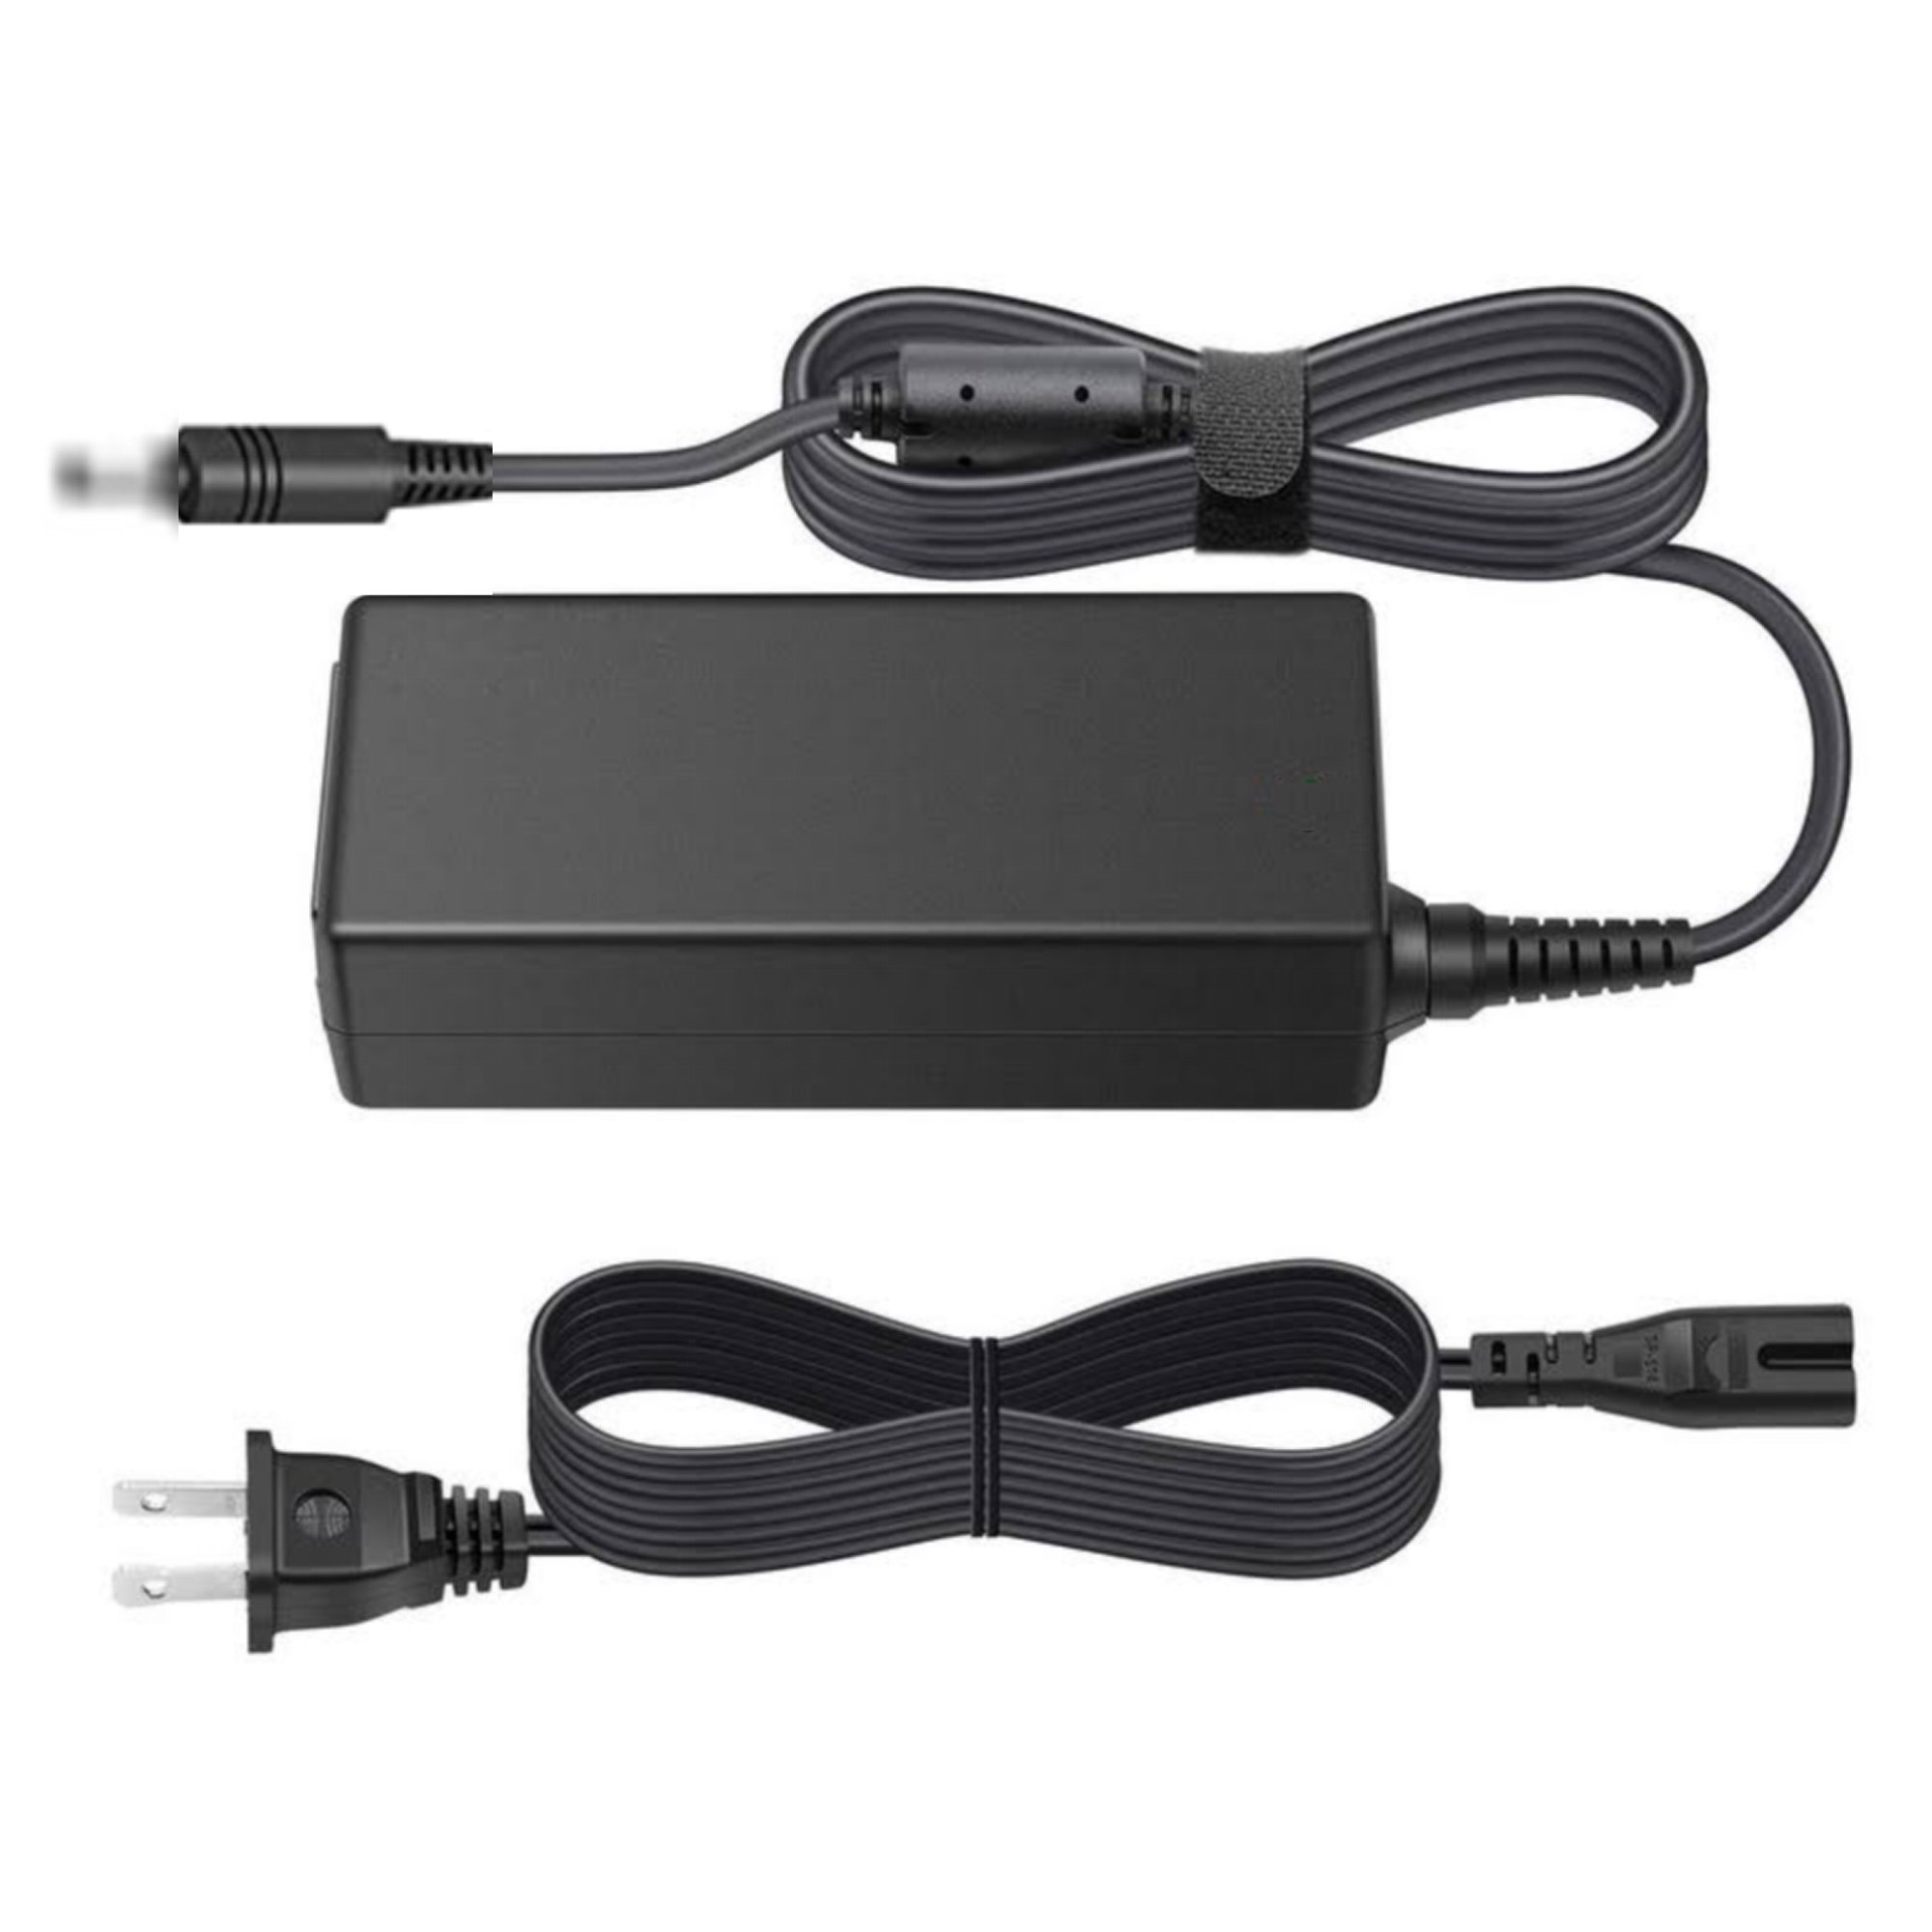 18V AC/DC Adapter Compatible with Philips DS8550 DS8550/37 DS8550/79  Fidelio Docking Station Speaker Dock OH-1065A1803100U DS8530 DS8530/37  DS8530/93 DS8500/12 18VDC Power Supply Cord Charger